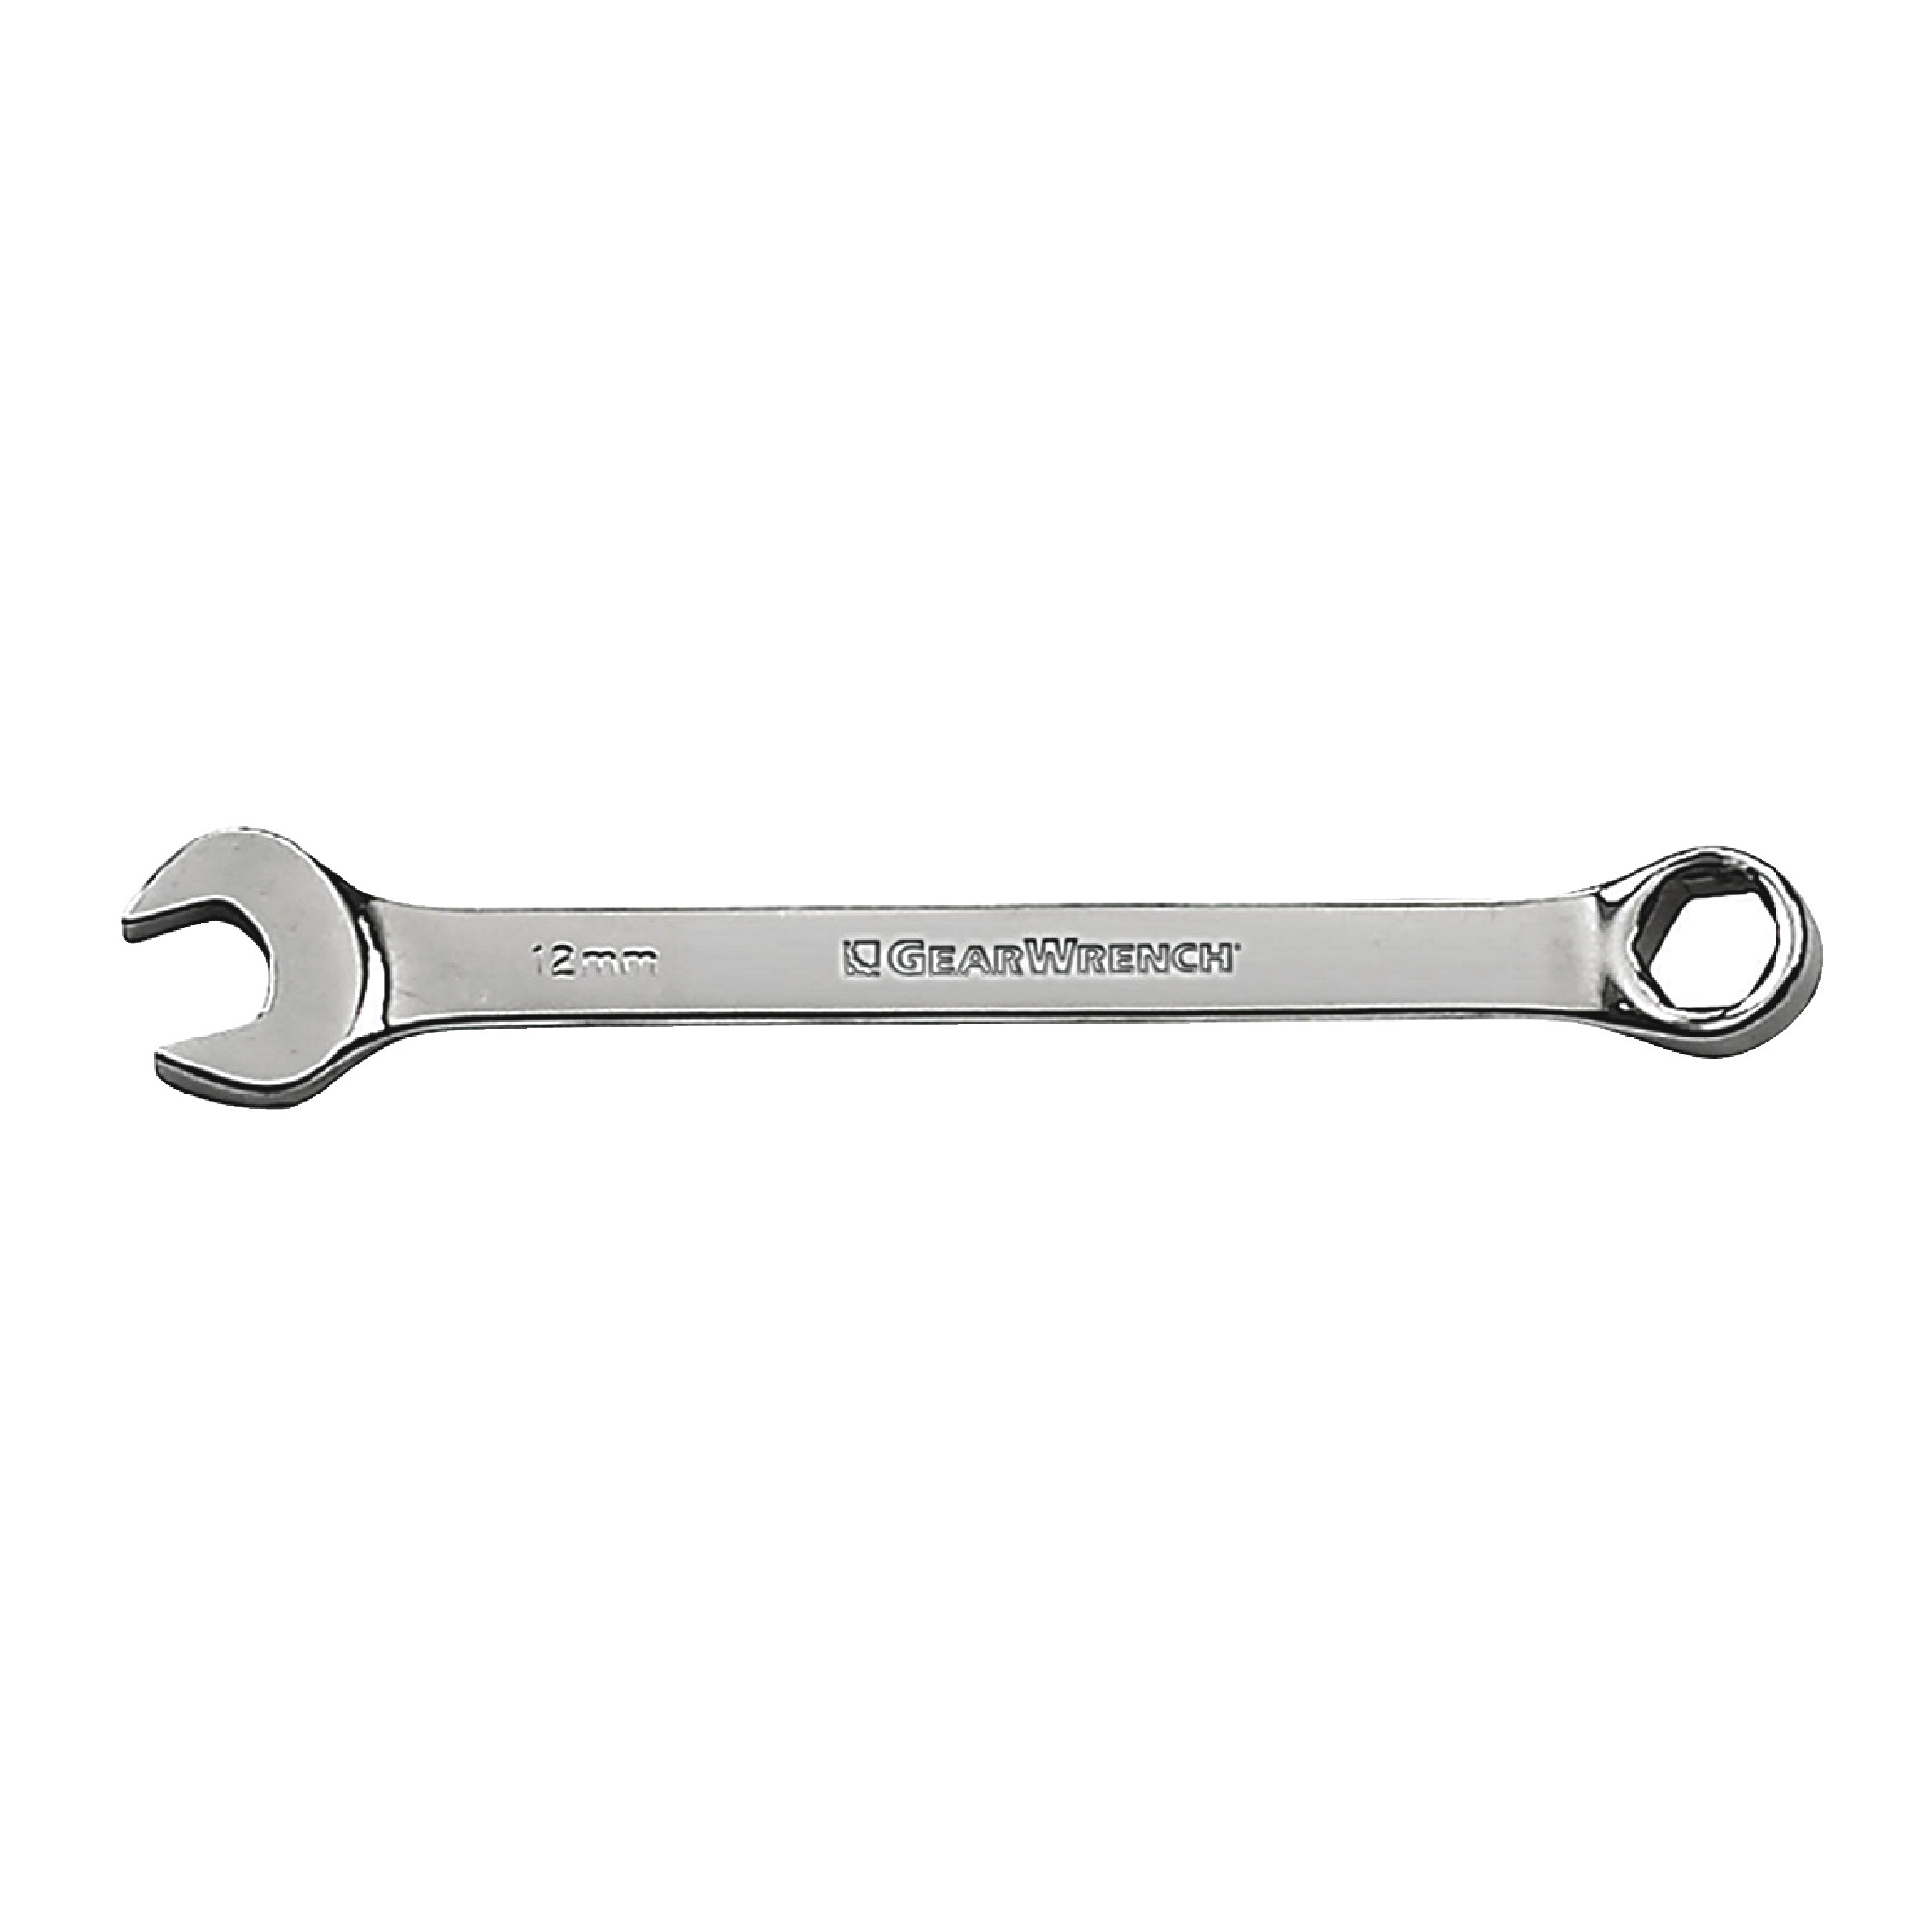 7mm 6 Point Combination Wrench